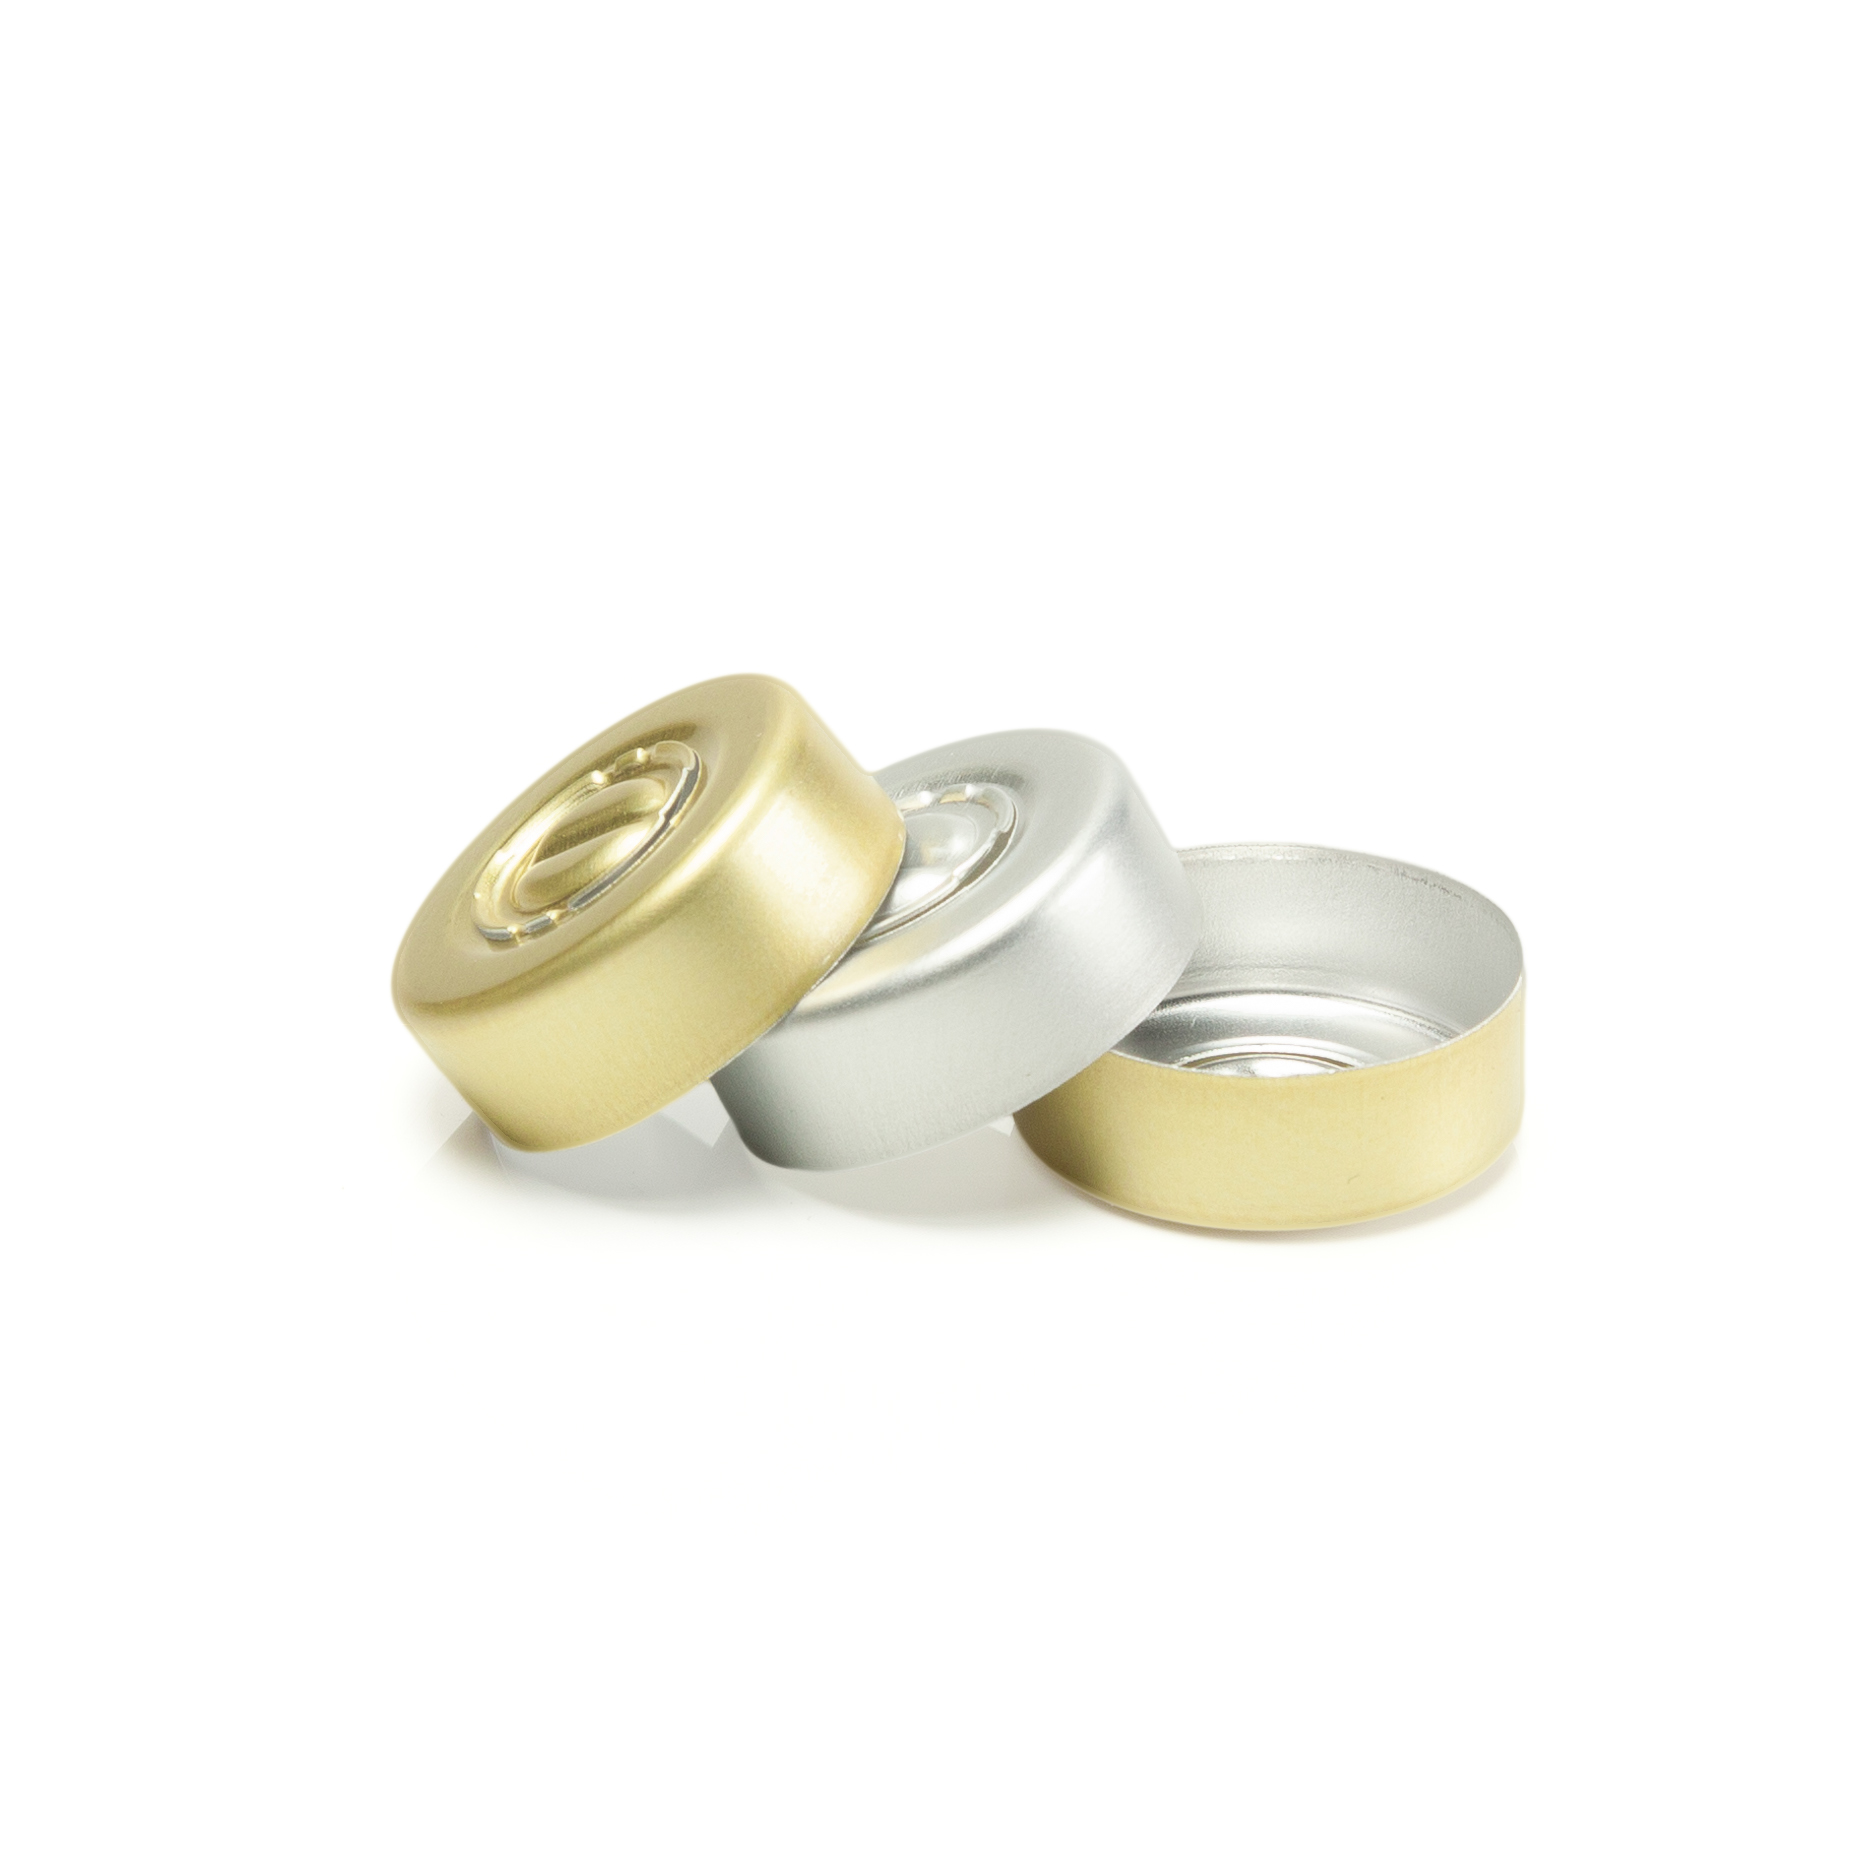 Gold and natural injectable capsule for 20mm mouth vial